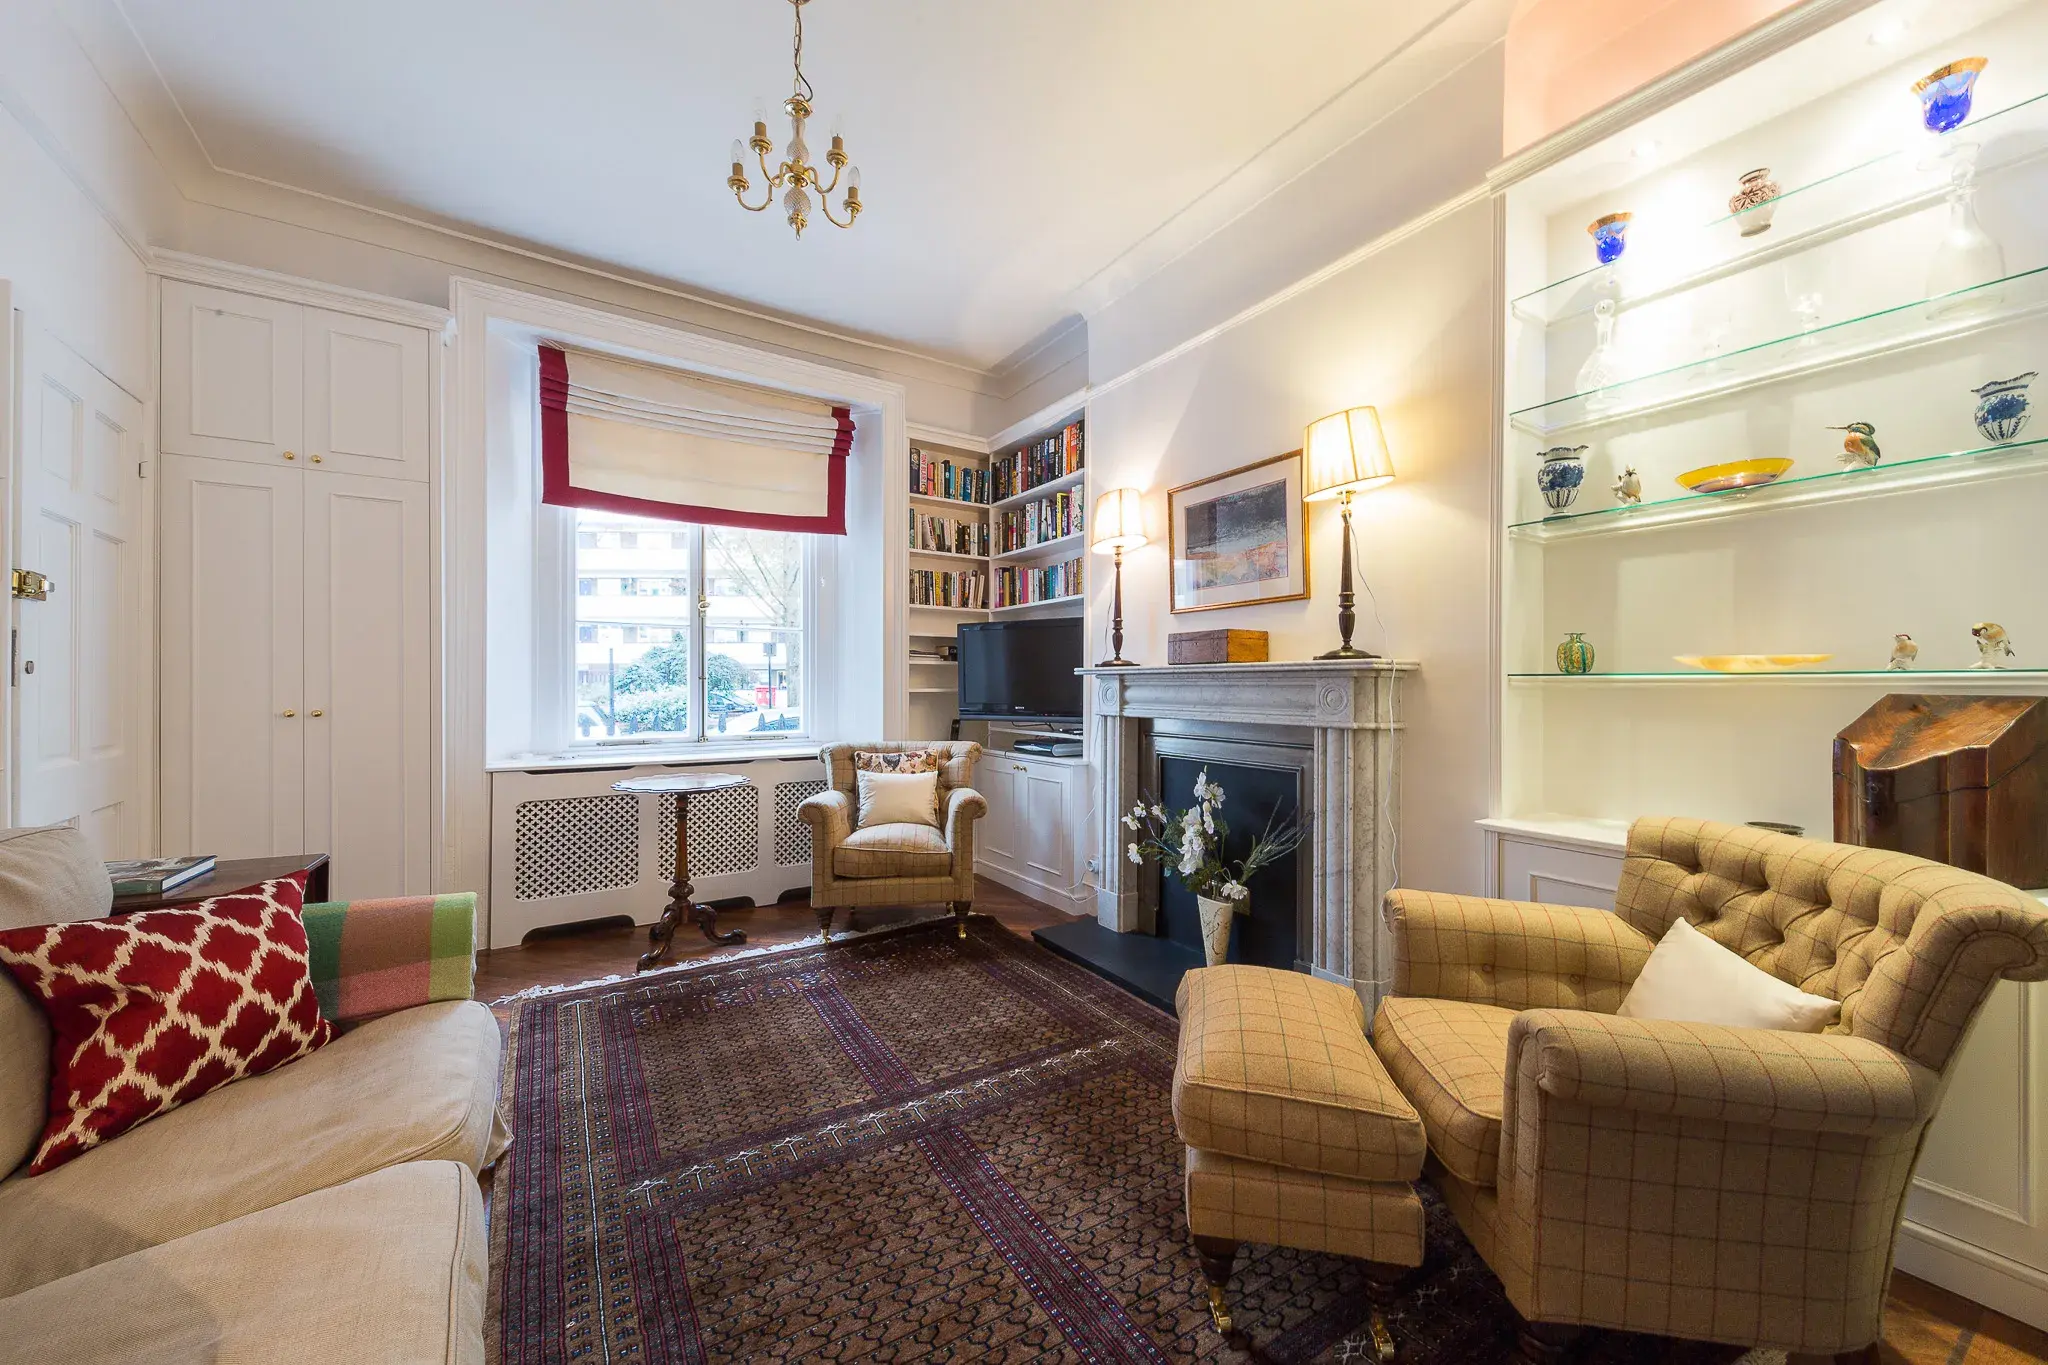 Winchester Street, holiday home in Pimlico, London